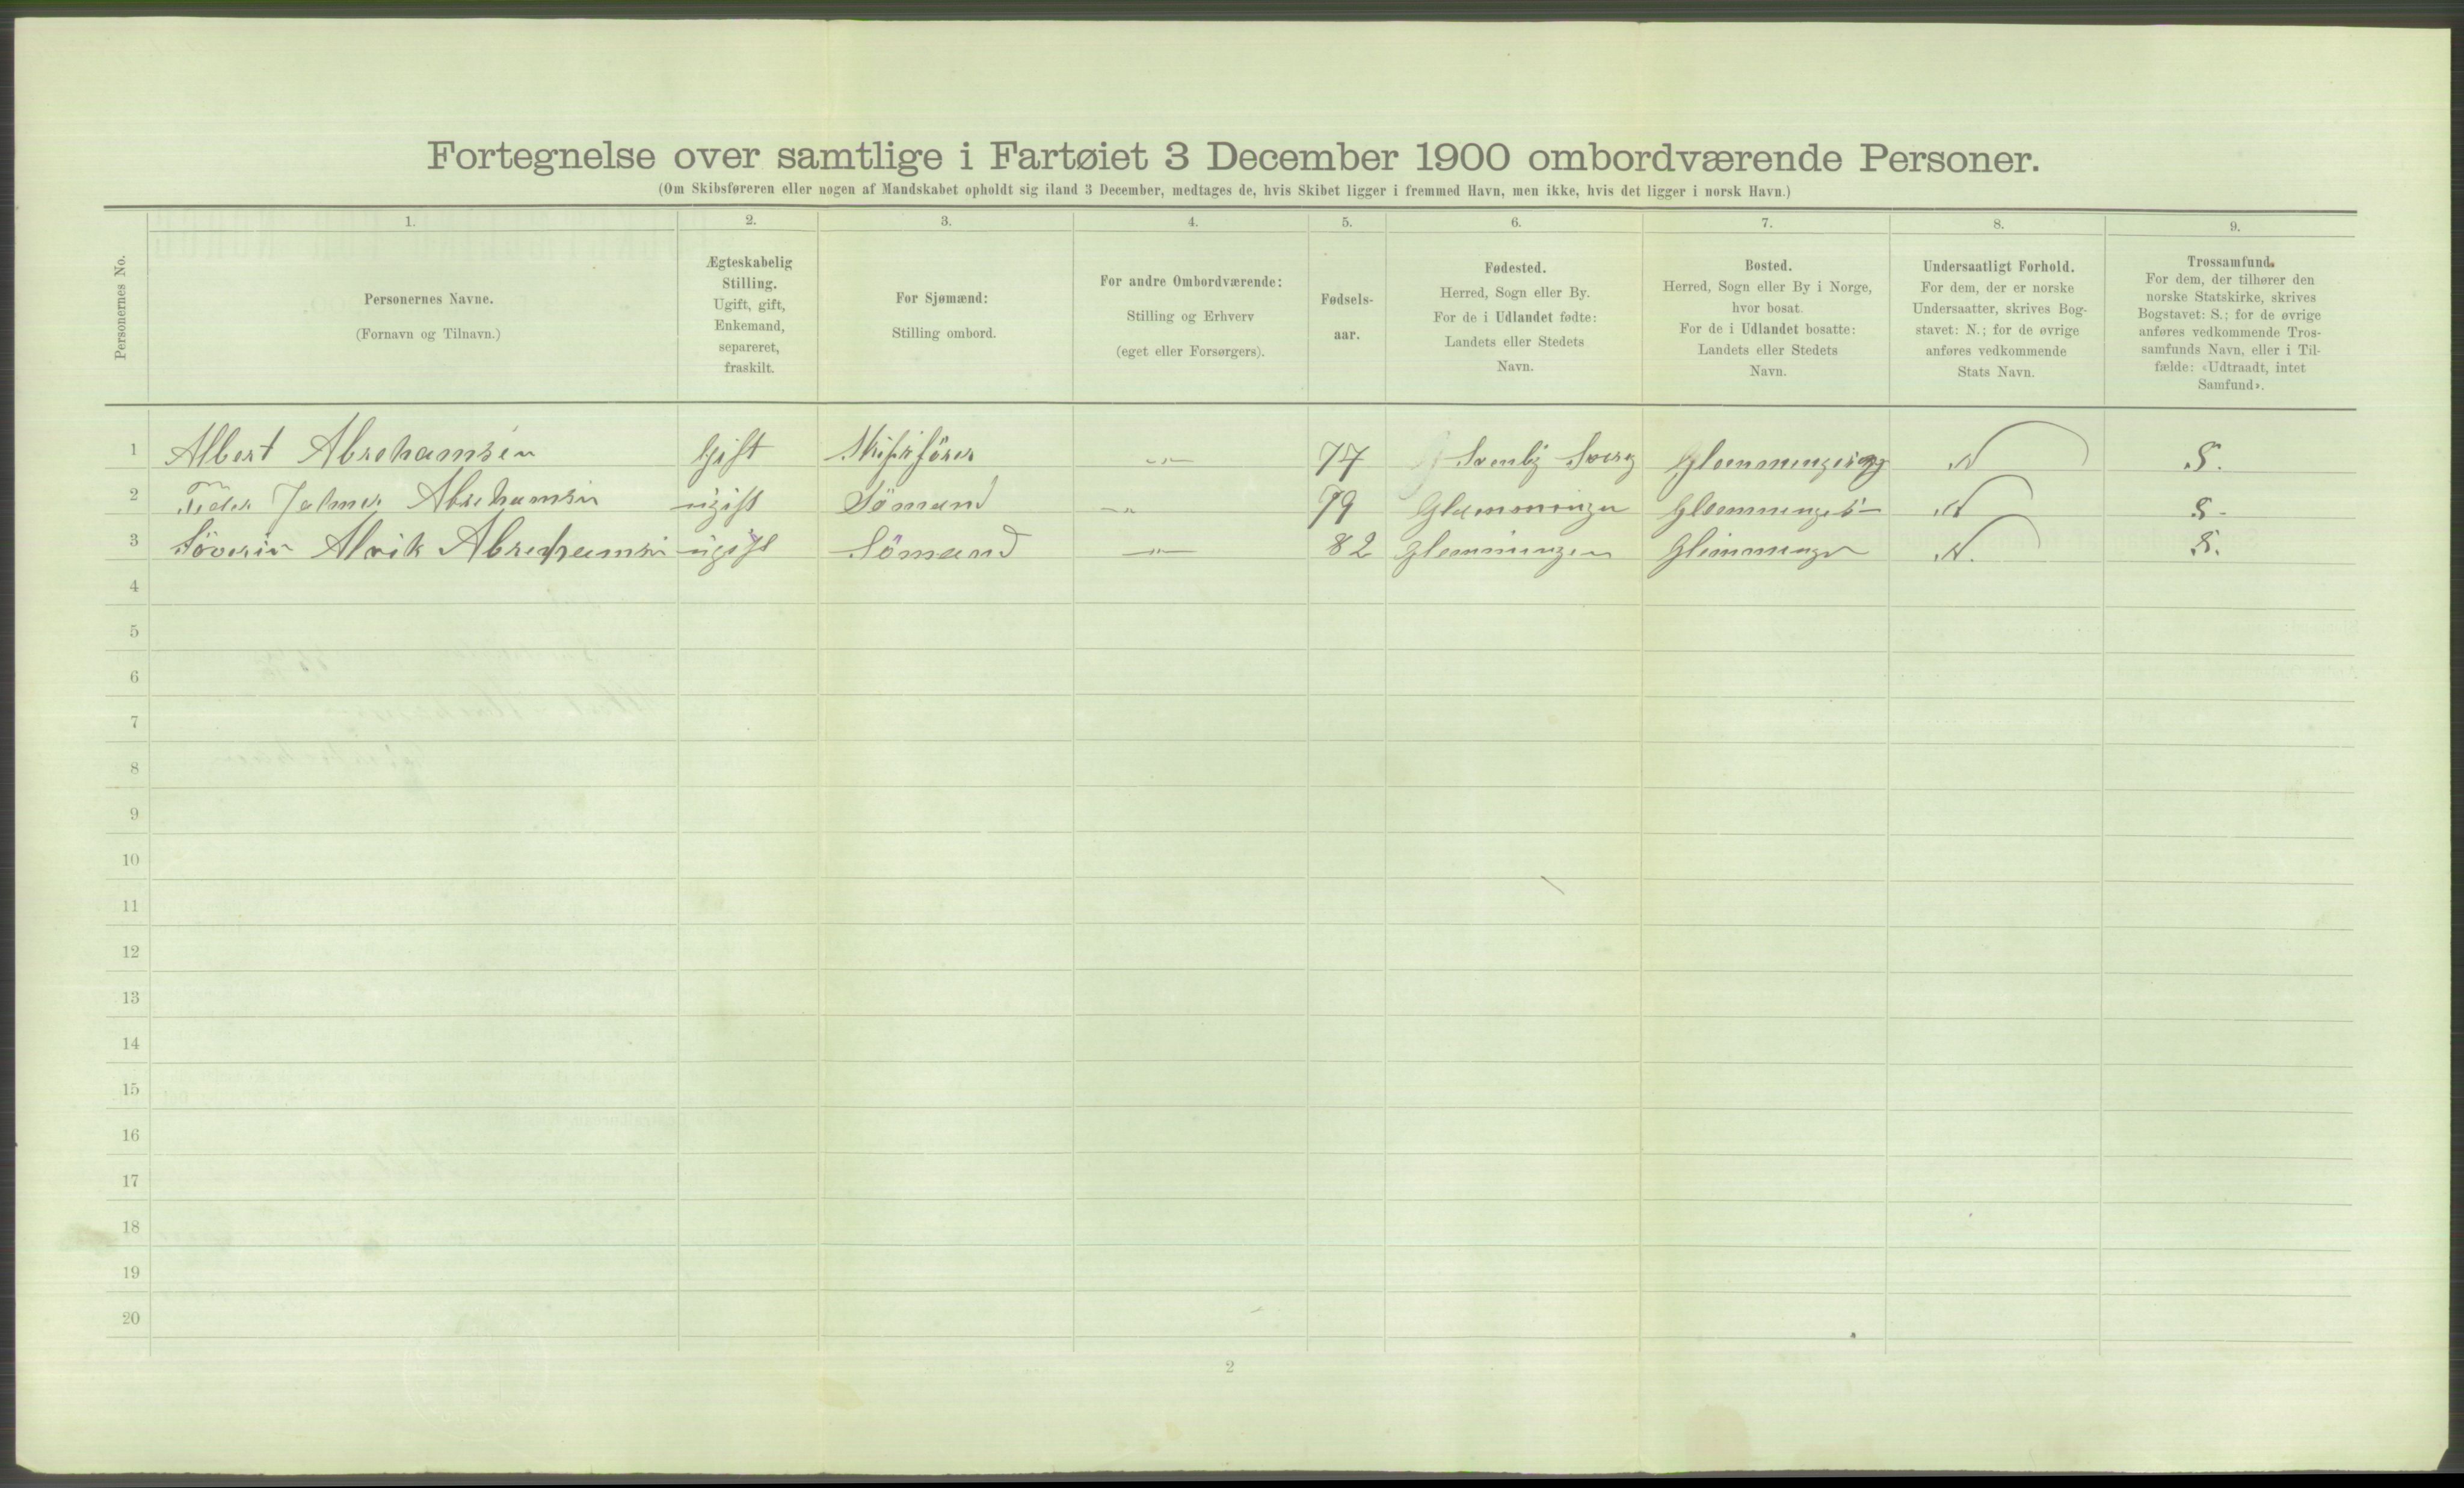 RA, 1900 Census - ship lists from ships in Norwegian harbours, harbours abroad and at sea, 1900, p. 830